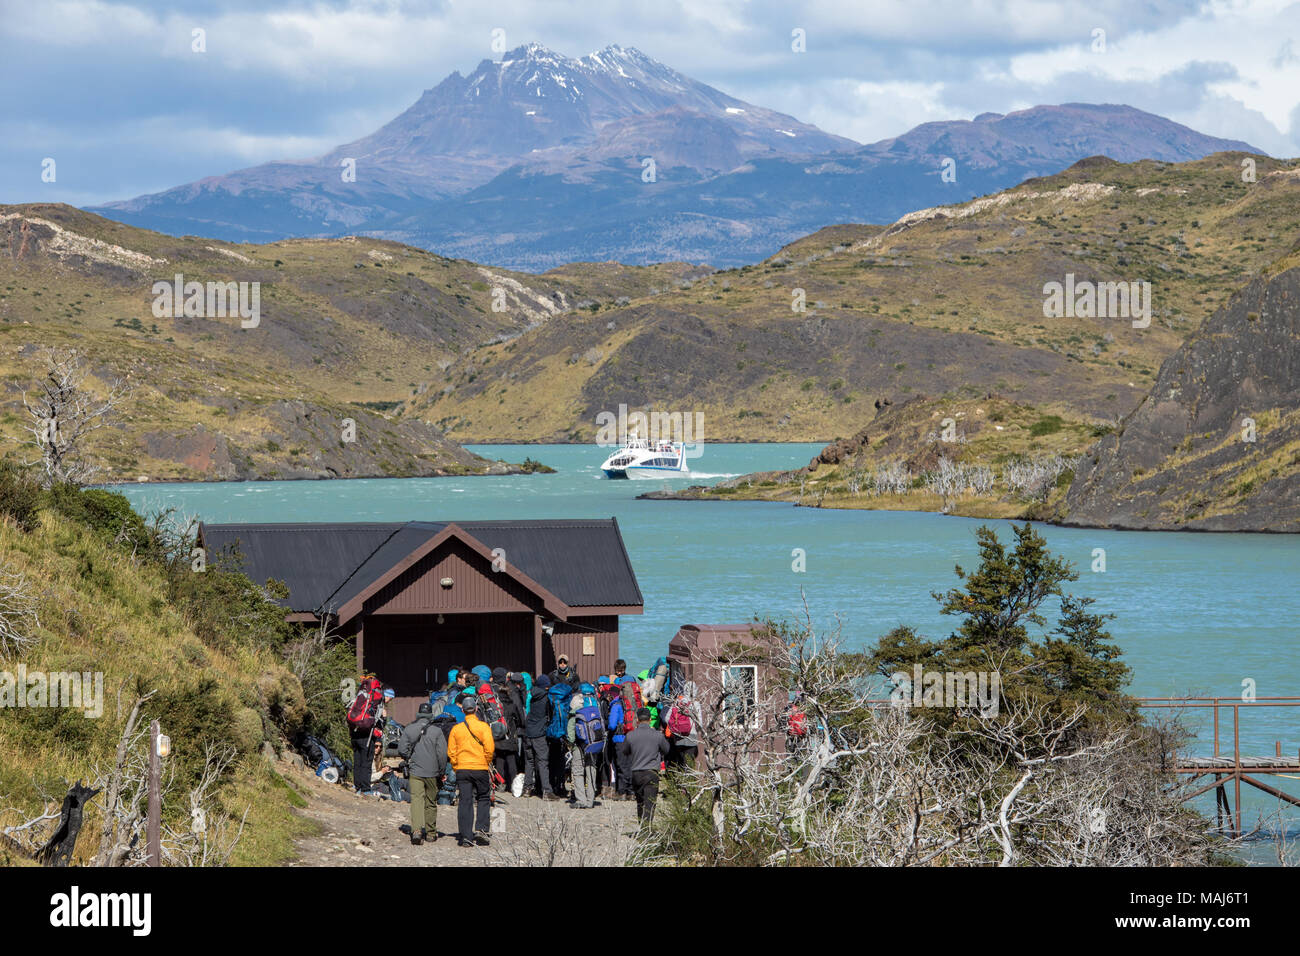 Hikers waiting for Hielos Patagonicos, Sightseeing boat on Lago Pehoe, Torres del Paine National Park, Patagonia, Chile Stock Photo